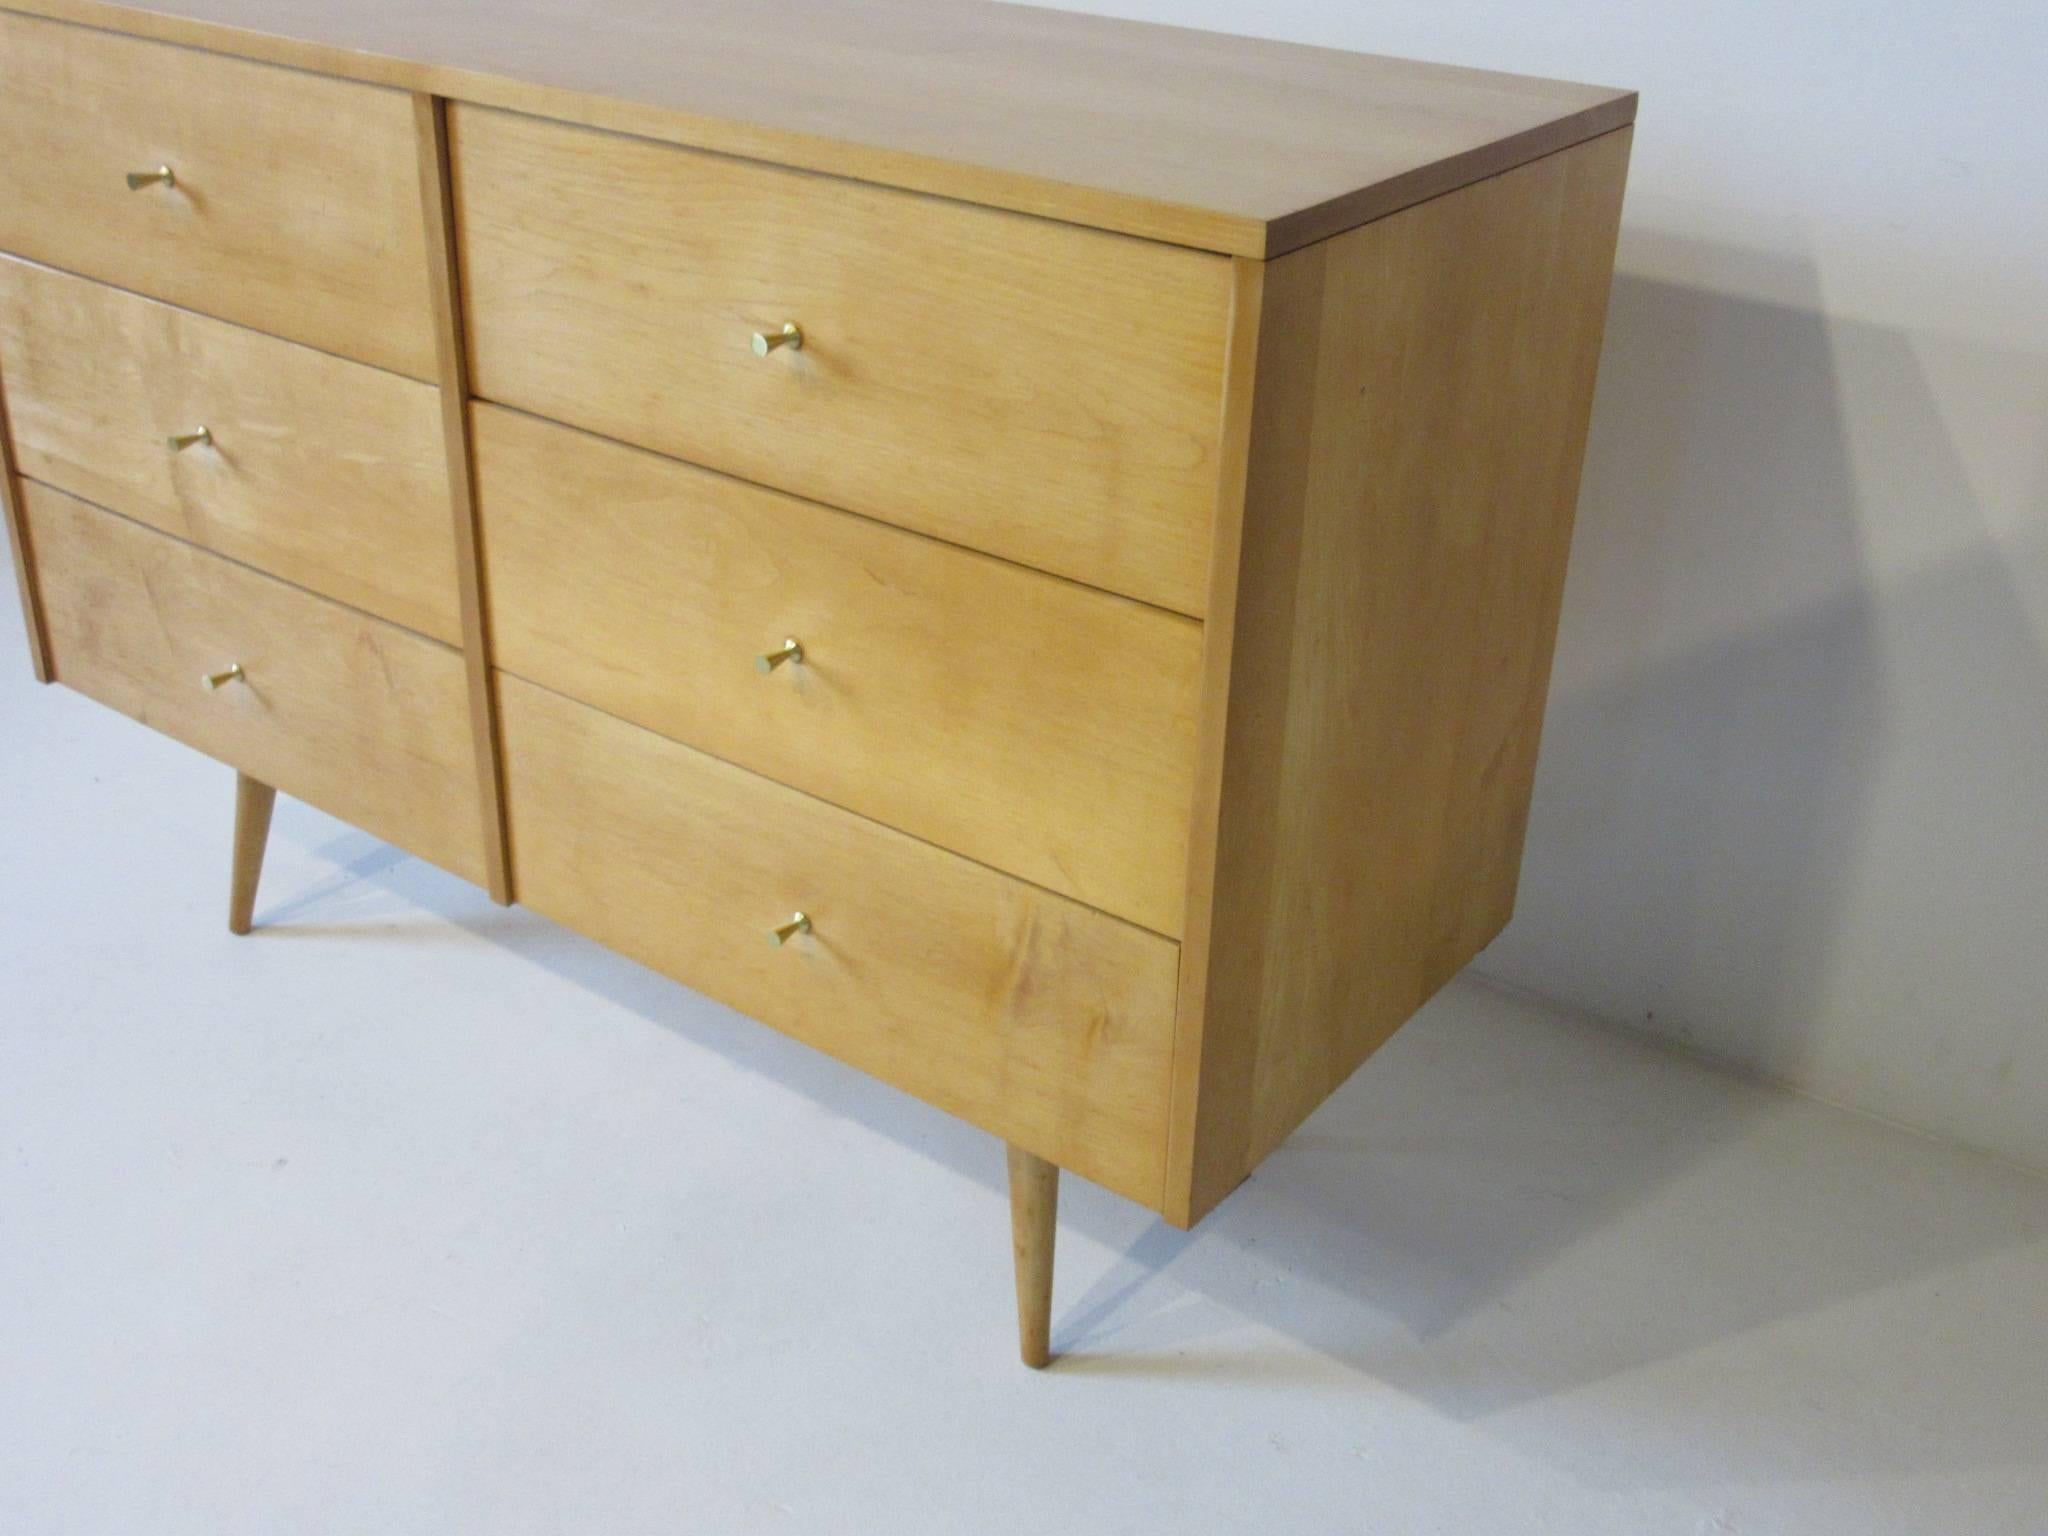 A McCobb solid maple six-drawer dresser chest in a honey toned finish with brass Tee pulls sitting on matching conical legs. From the Planner Group Line and manufactured by the Winchendon Furniture Company.